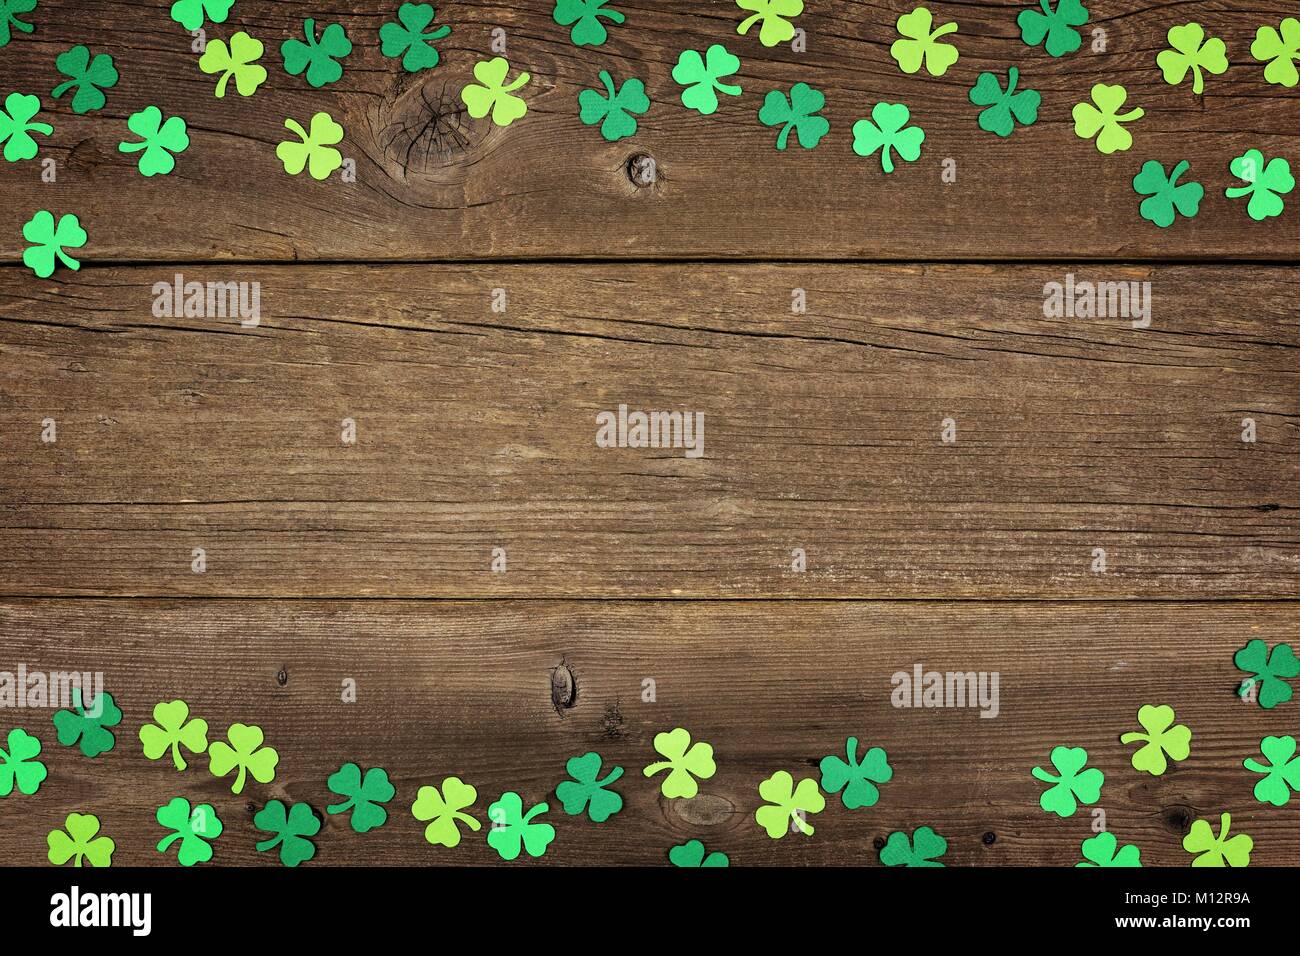 St Patricks Day double border of paper shamrocks over an old rustic wood background Stock Photo